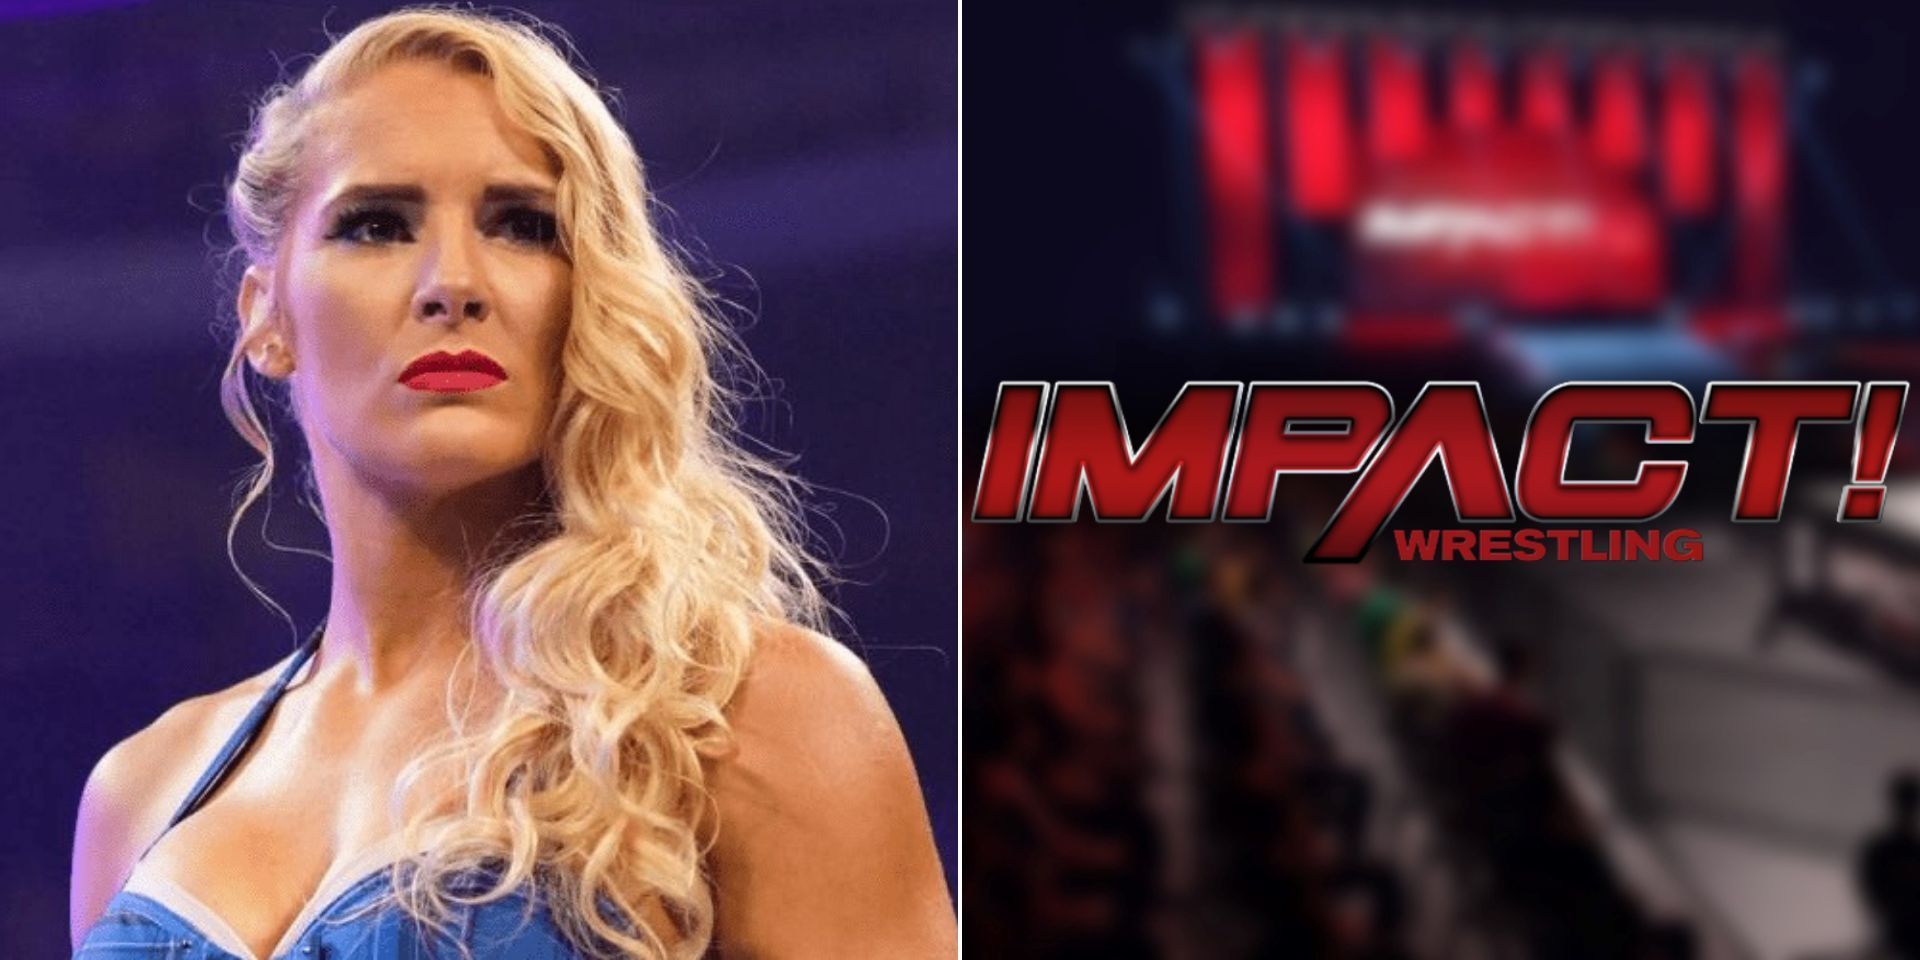 WWE veteran comments on Lacey Evans